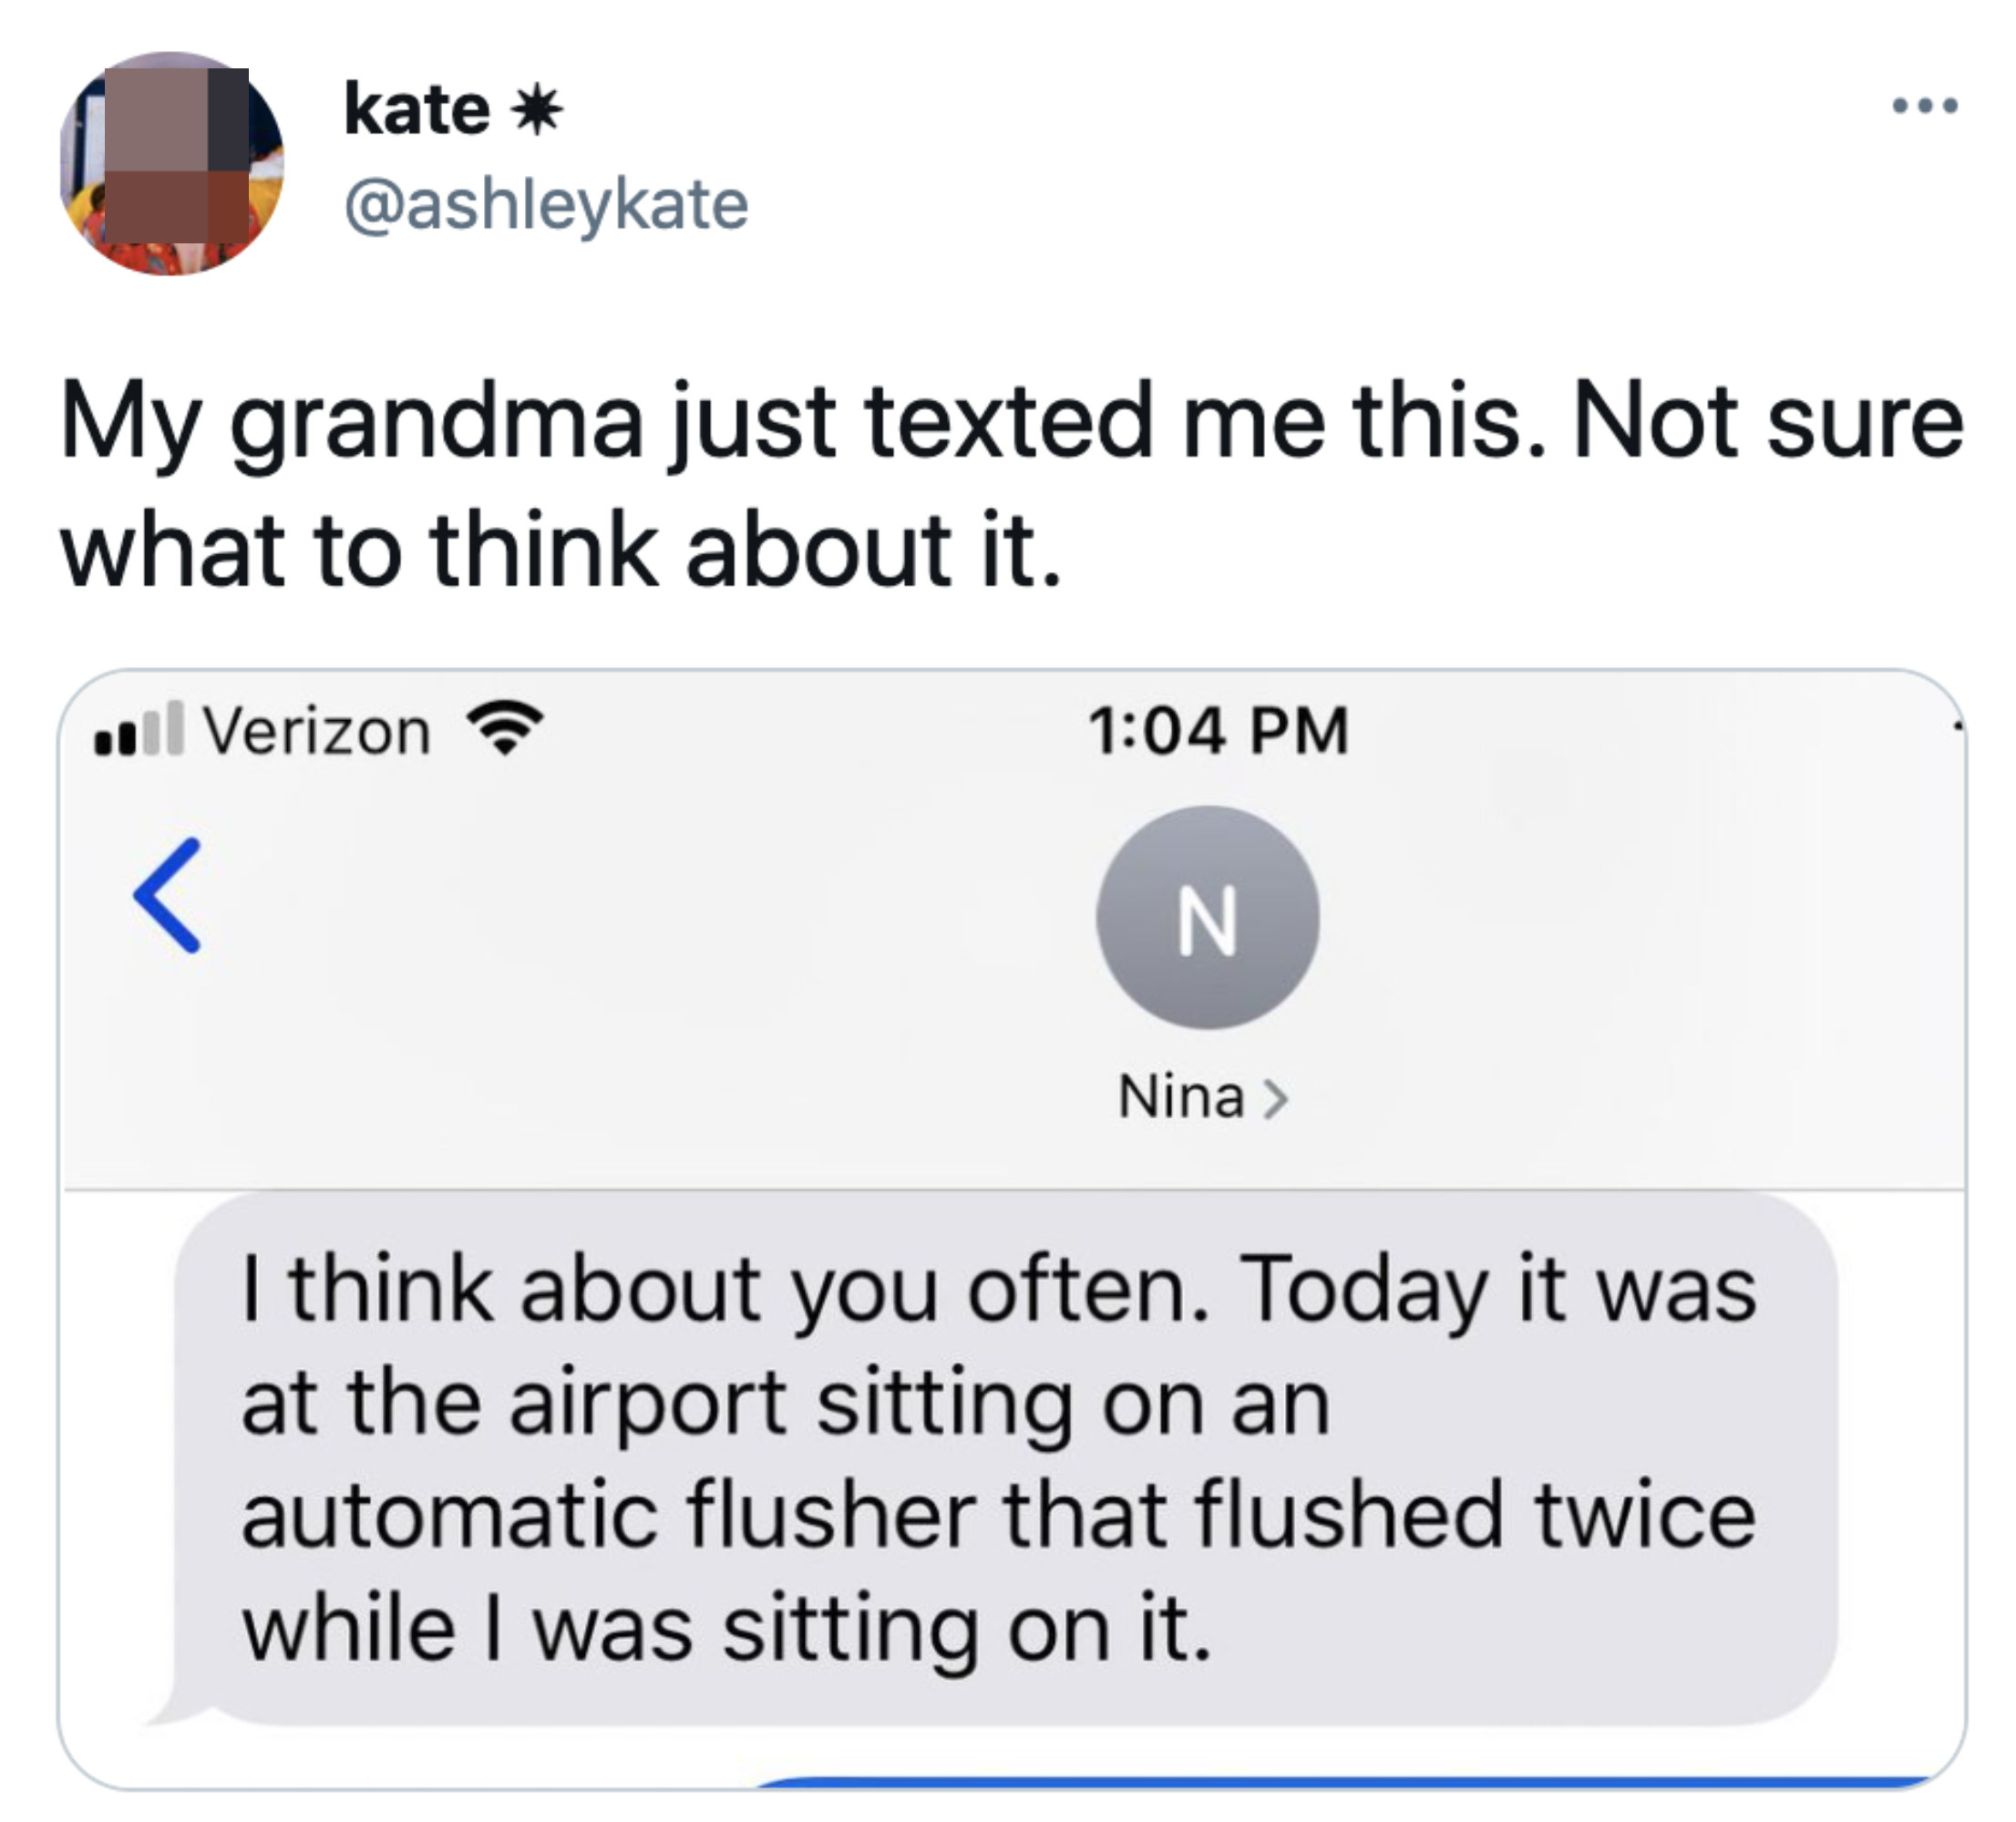 Text messages from an old person that&#x27;s about remembering their granddaughter while on the toilet